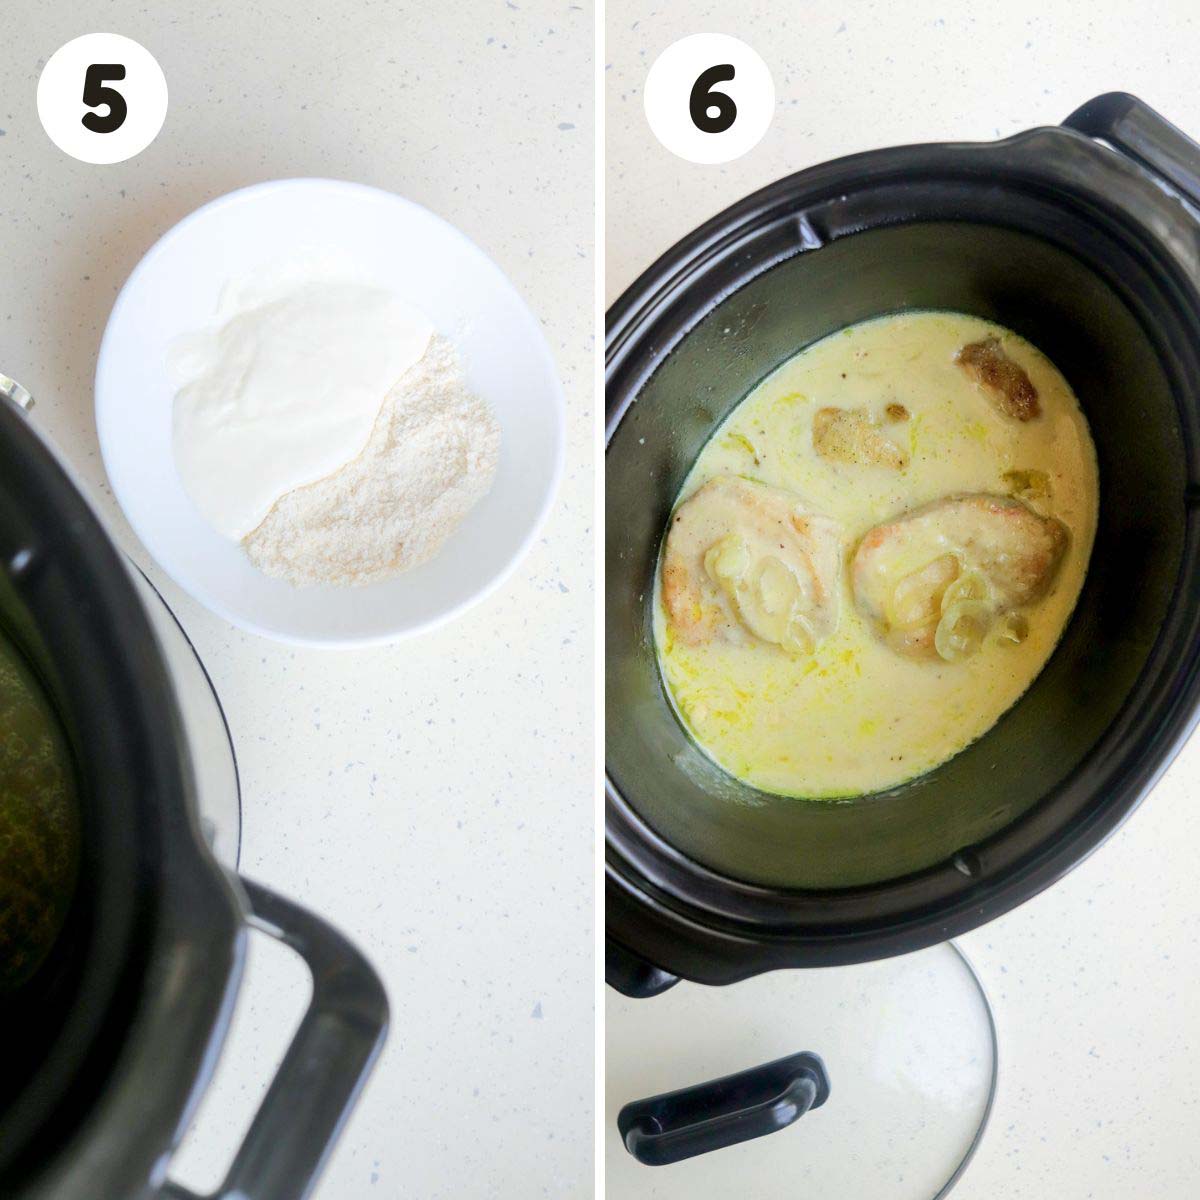 Steps to slow cook the pork chops.